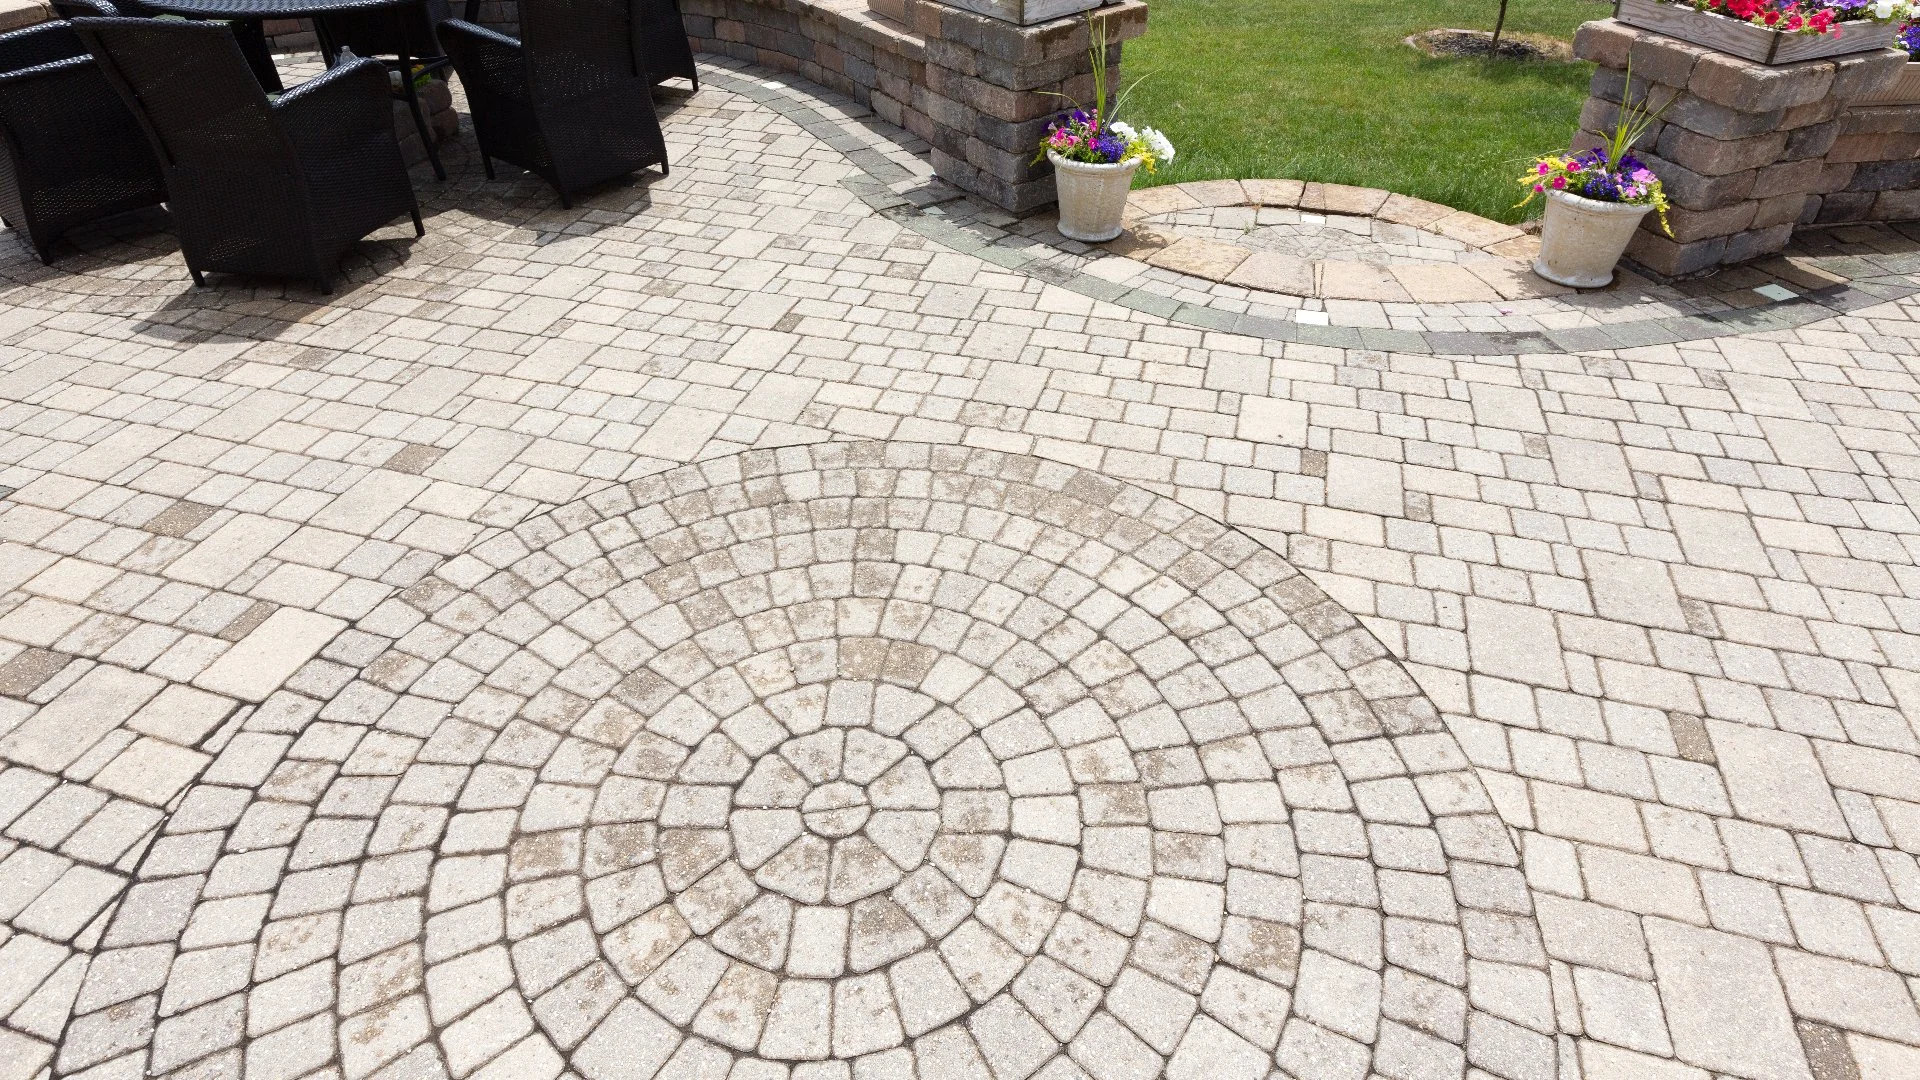 Are Pavers a Good Material to Use for Your New Patio?